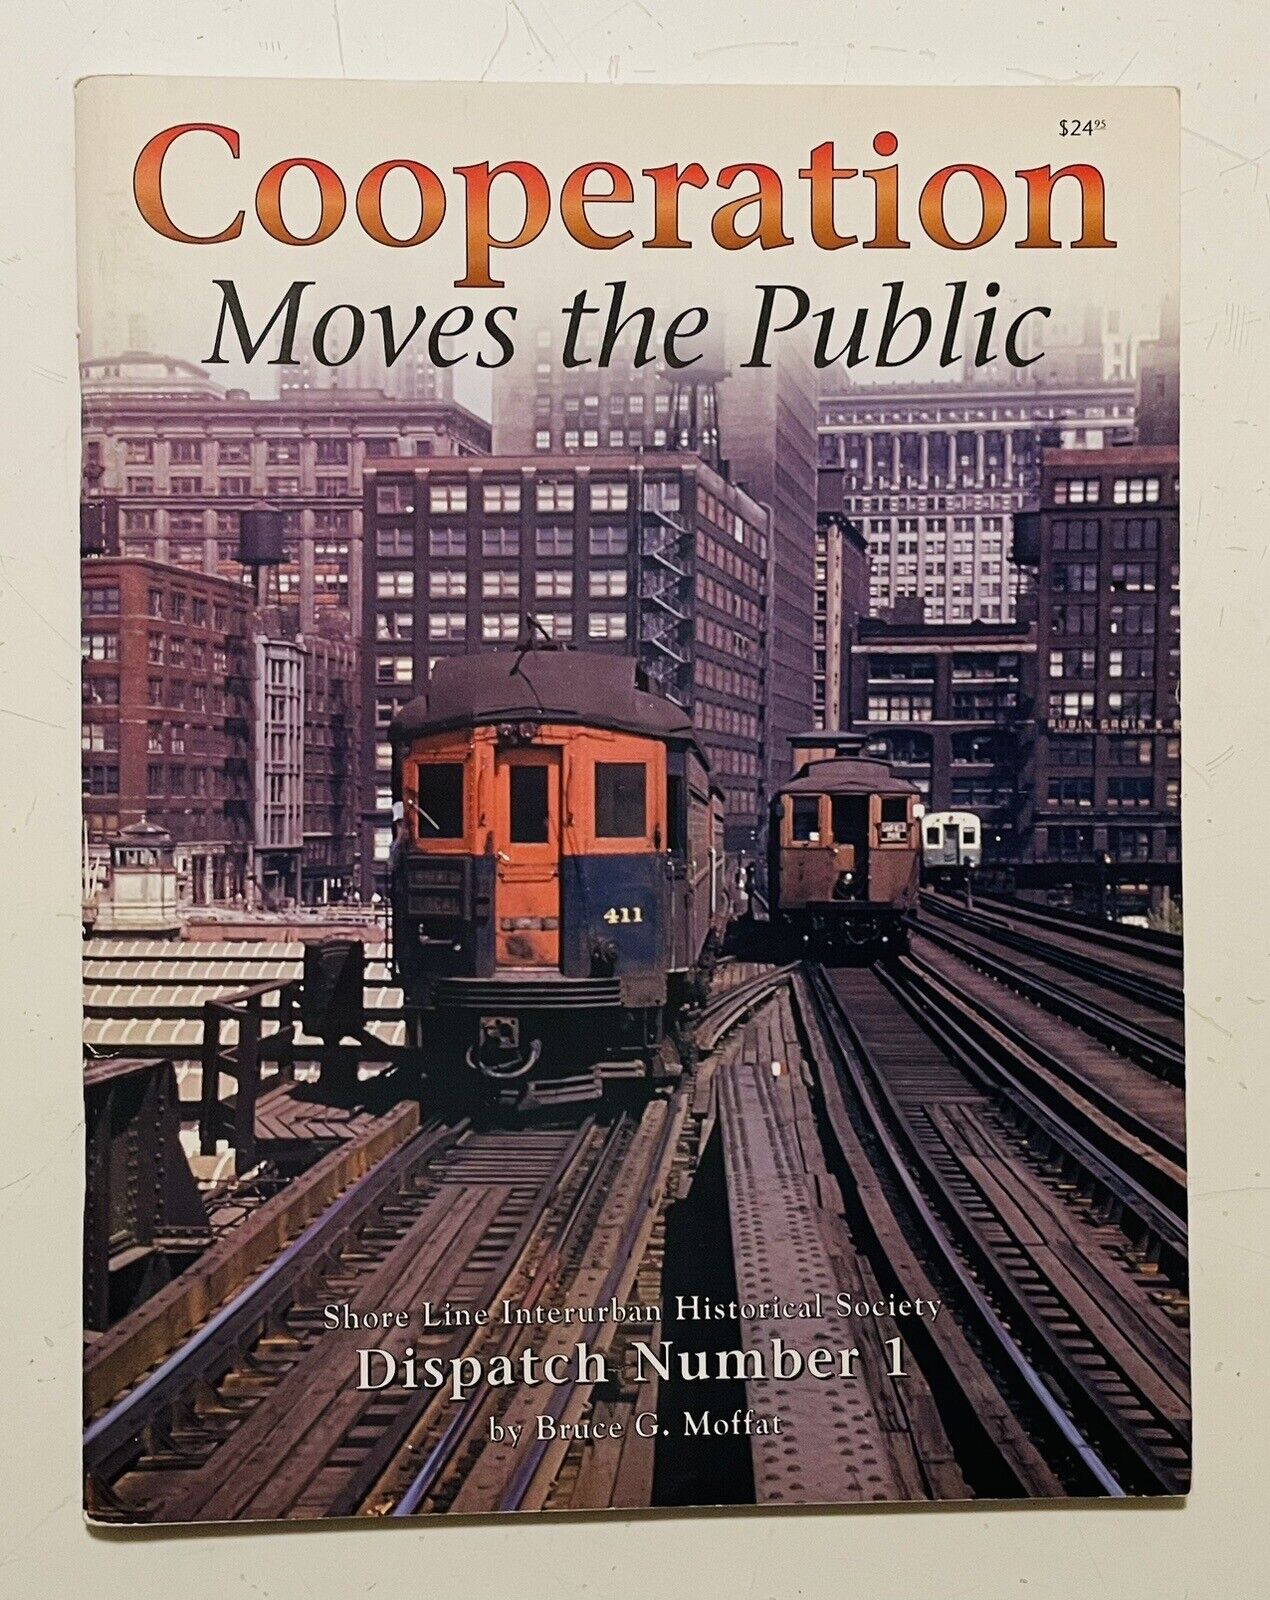 COOPERATION MOVES THE PUBLIC by Bruce Moffat - Chicago Interurban Trains History